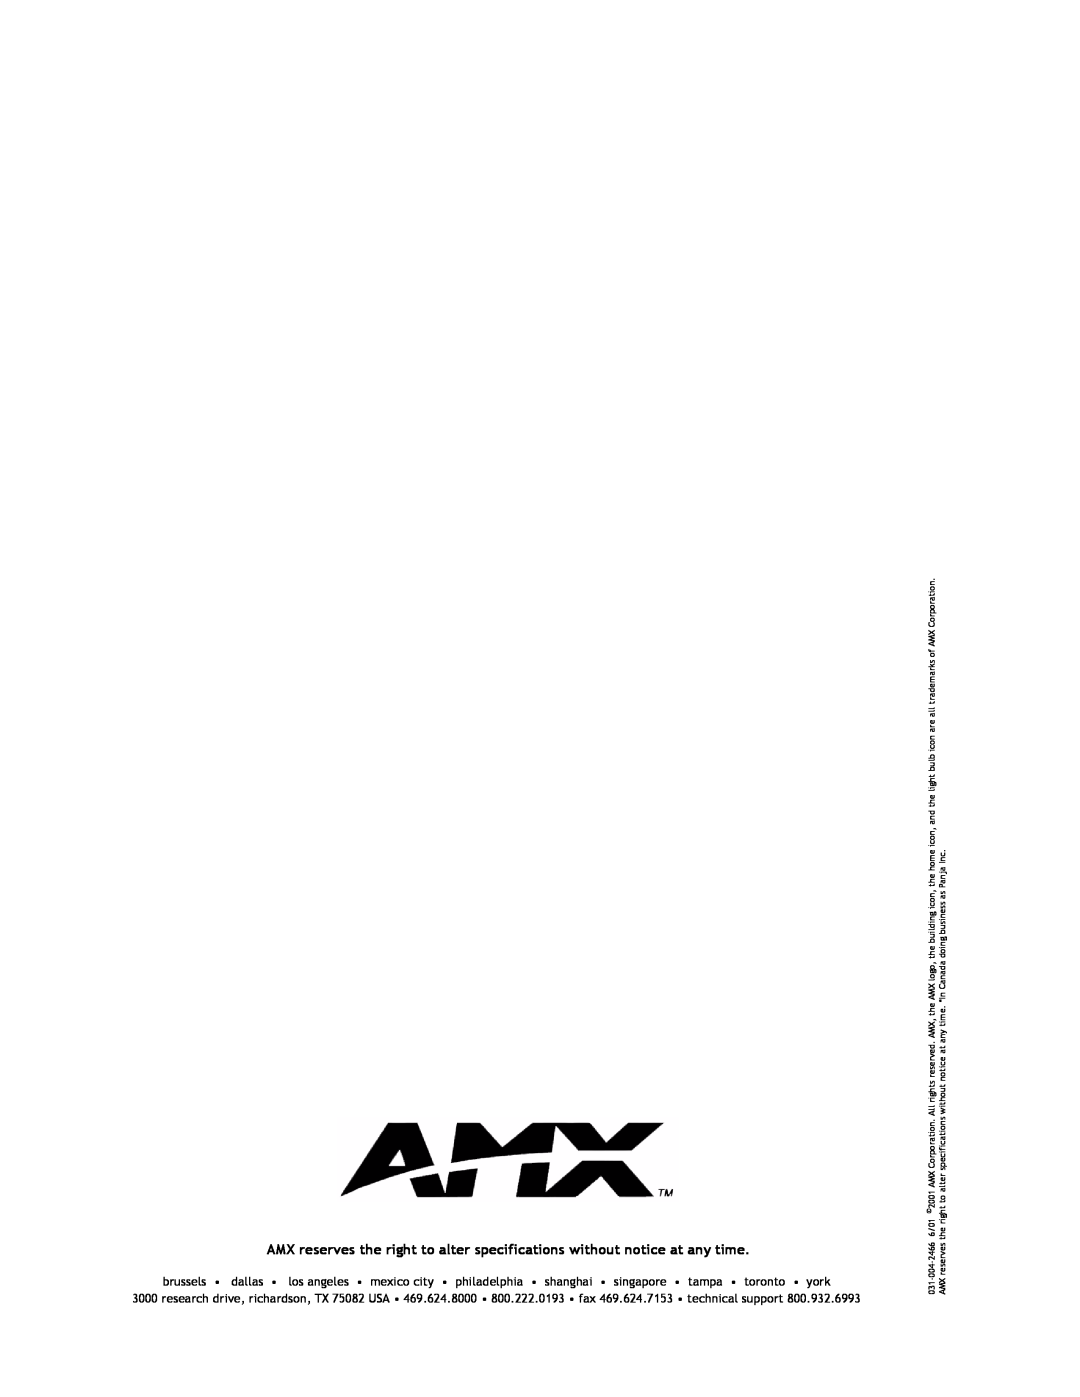 AMX AXC-MIDI Panja Inc, AMX reserves, the building icon, doing business as, AMX logo, In Canada, 2001AMX Corporation, 6/01 